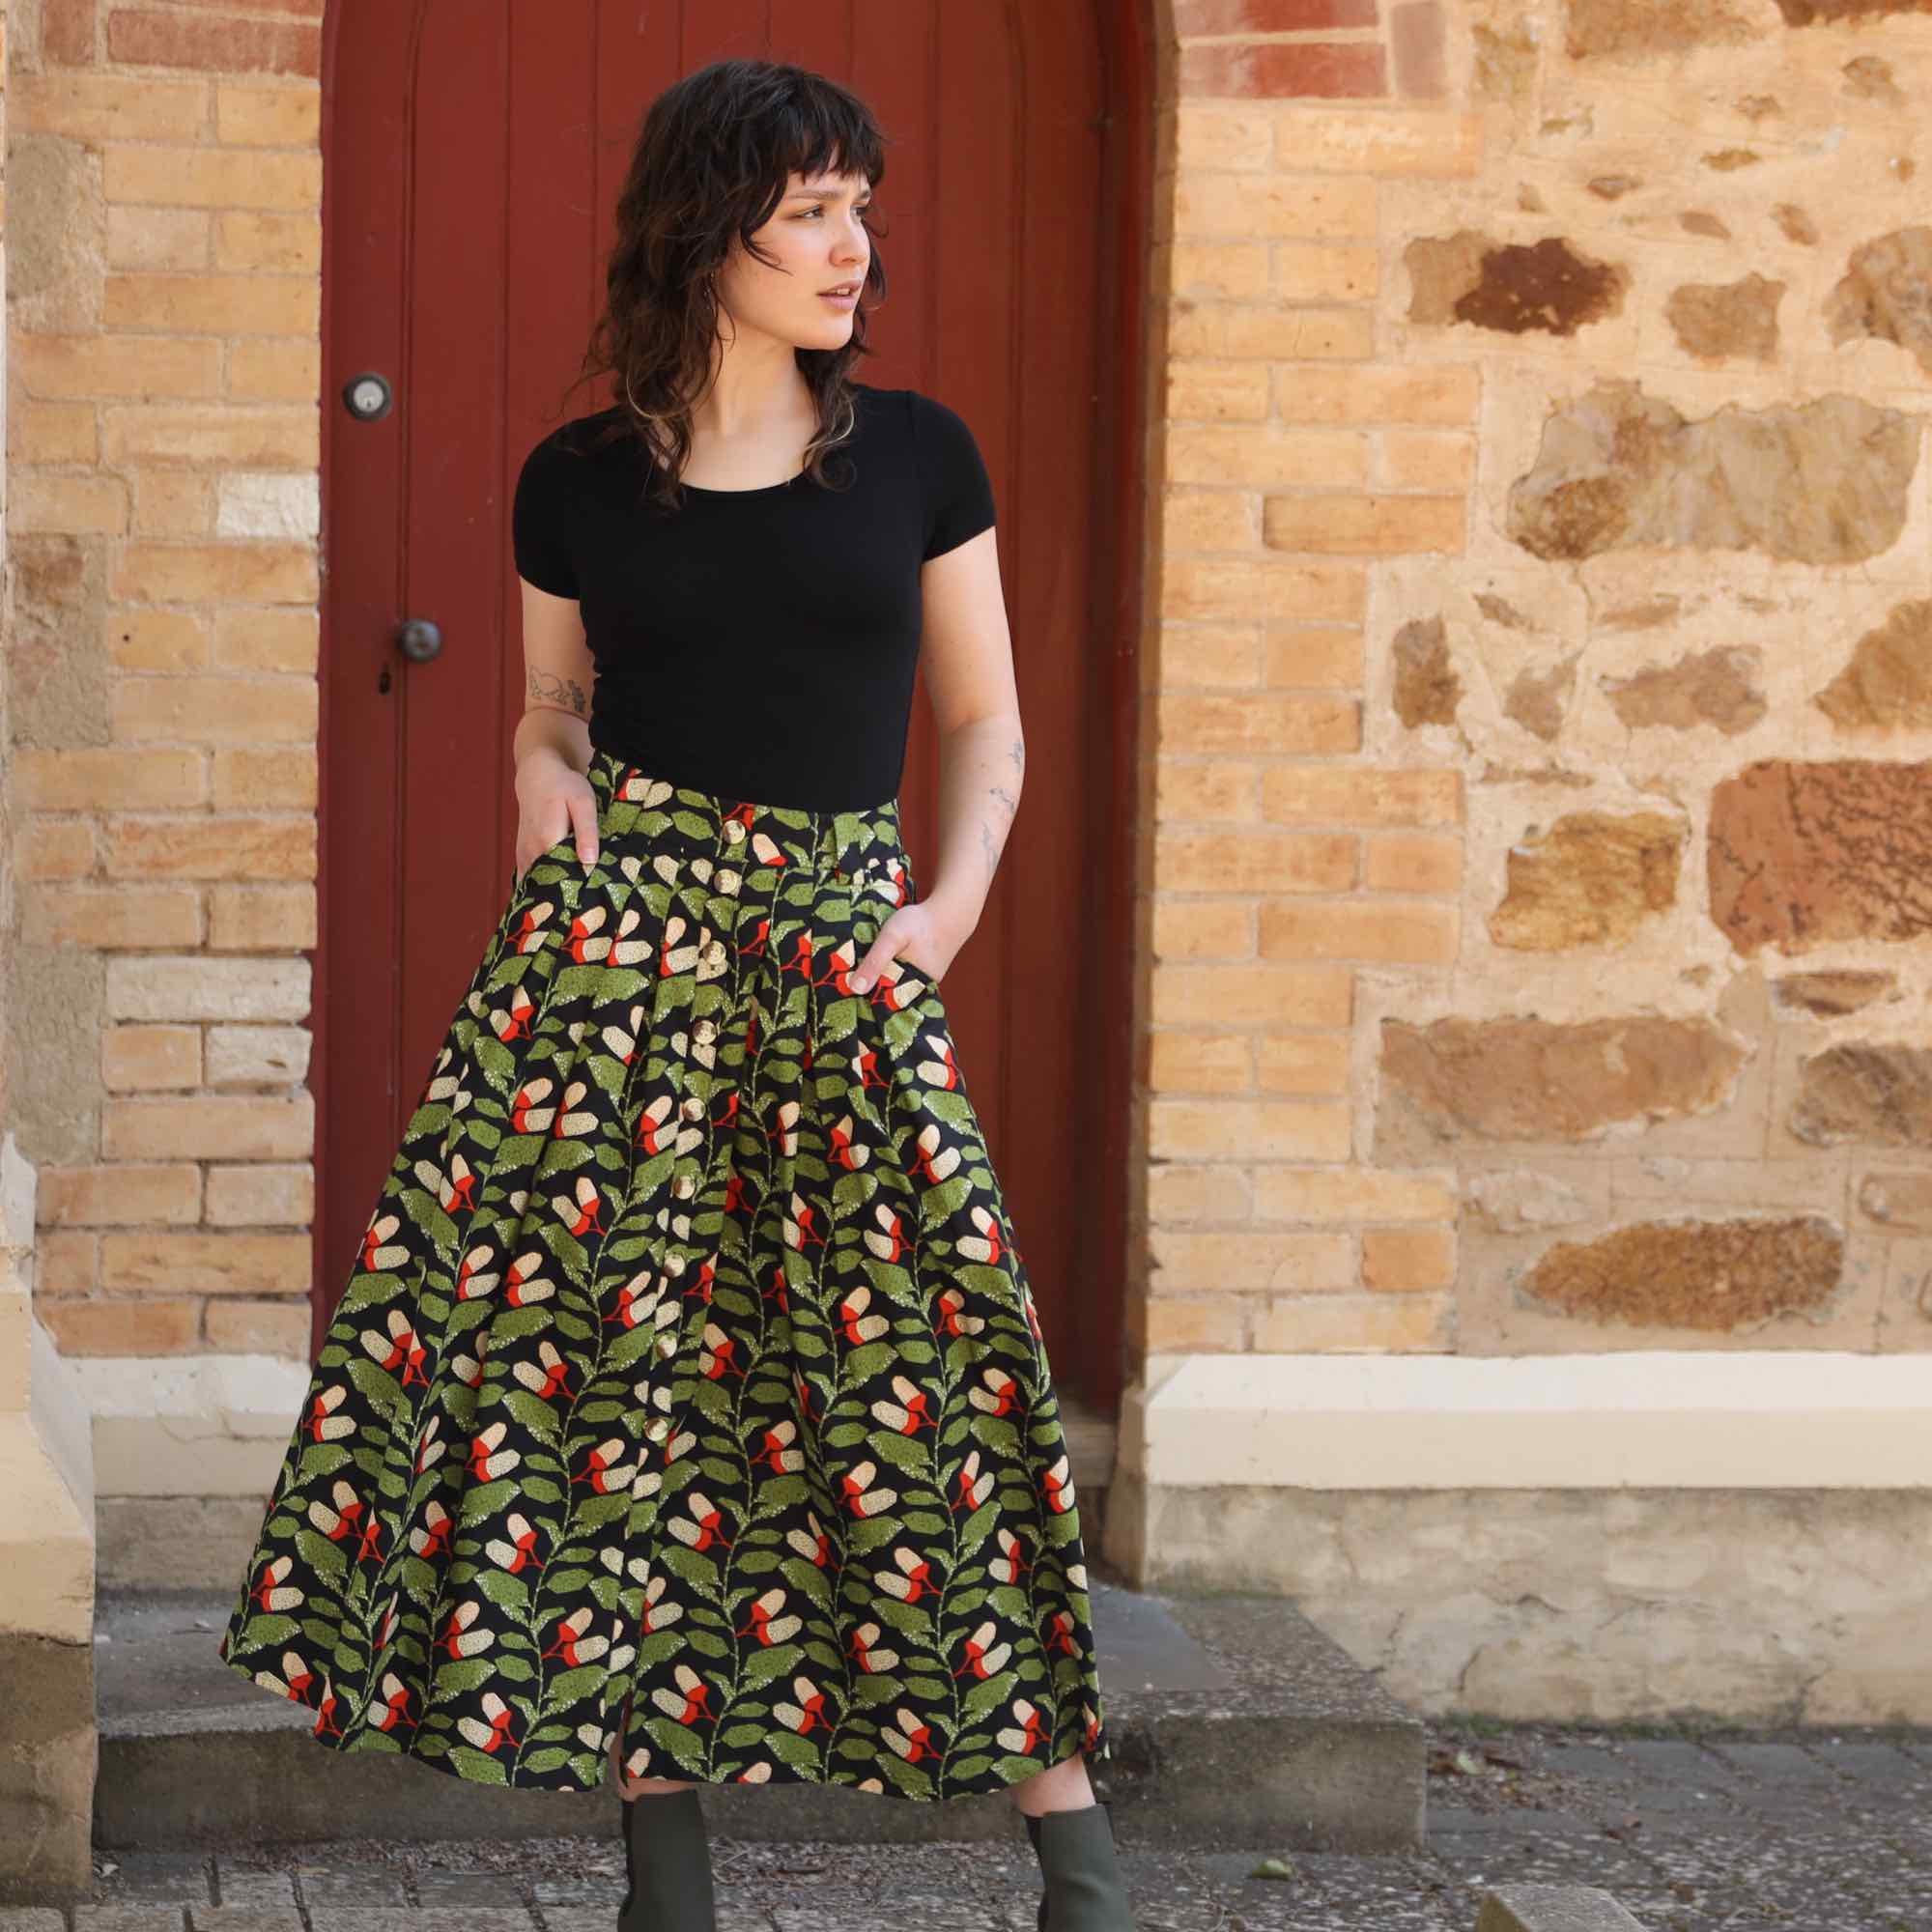 Woman wearing black cotton maxi skirt with pockets and buttons down the front